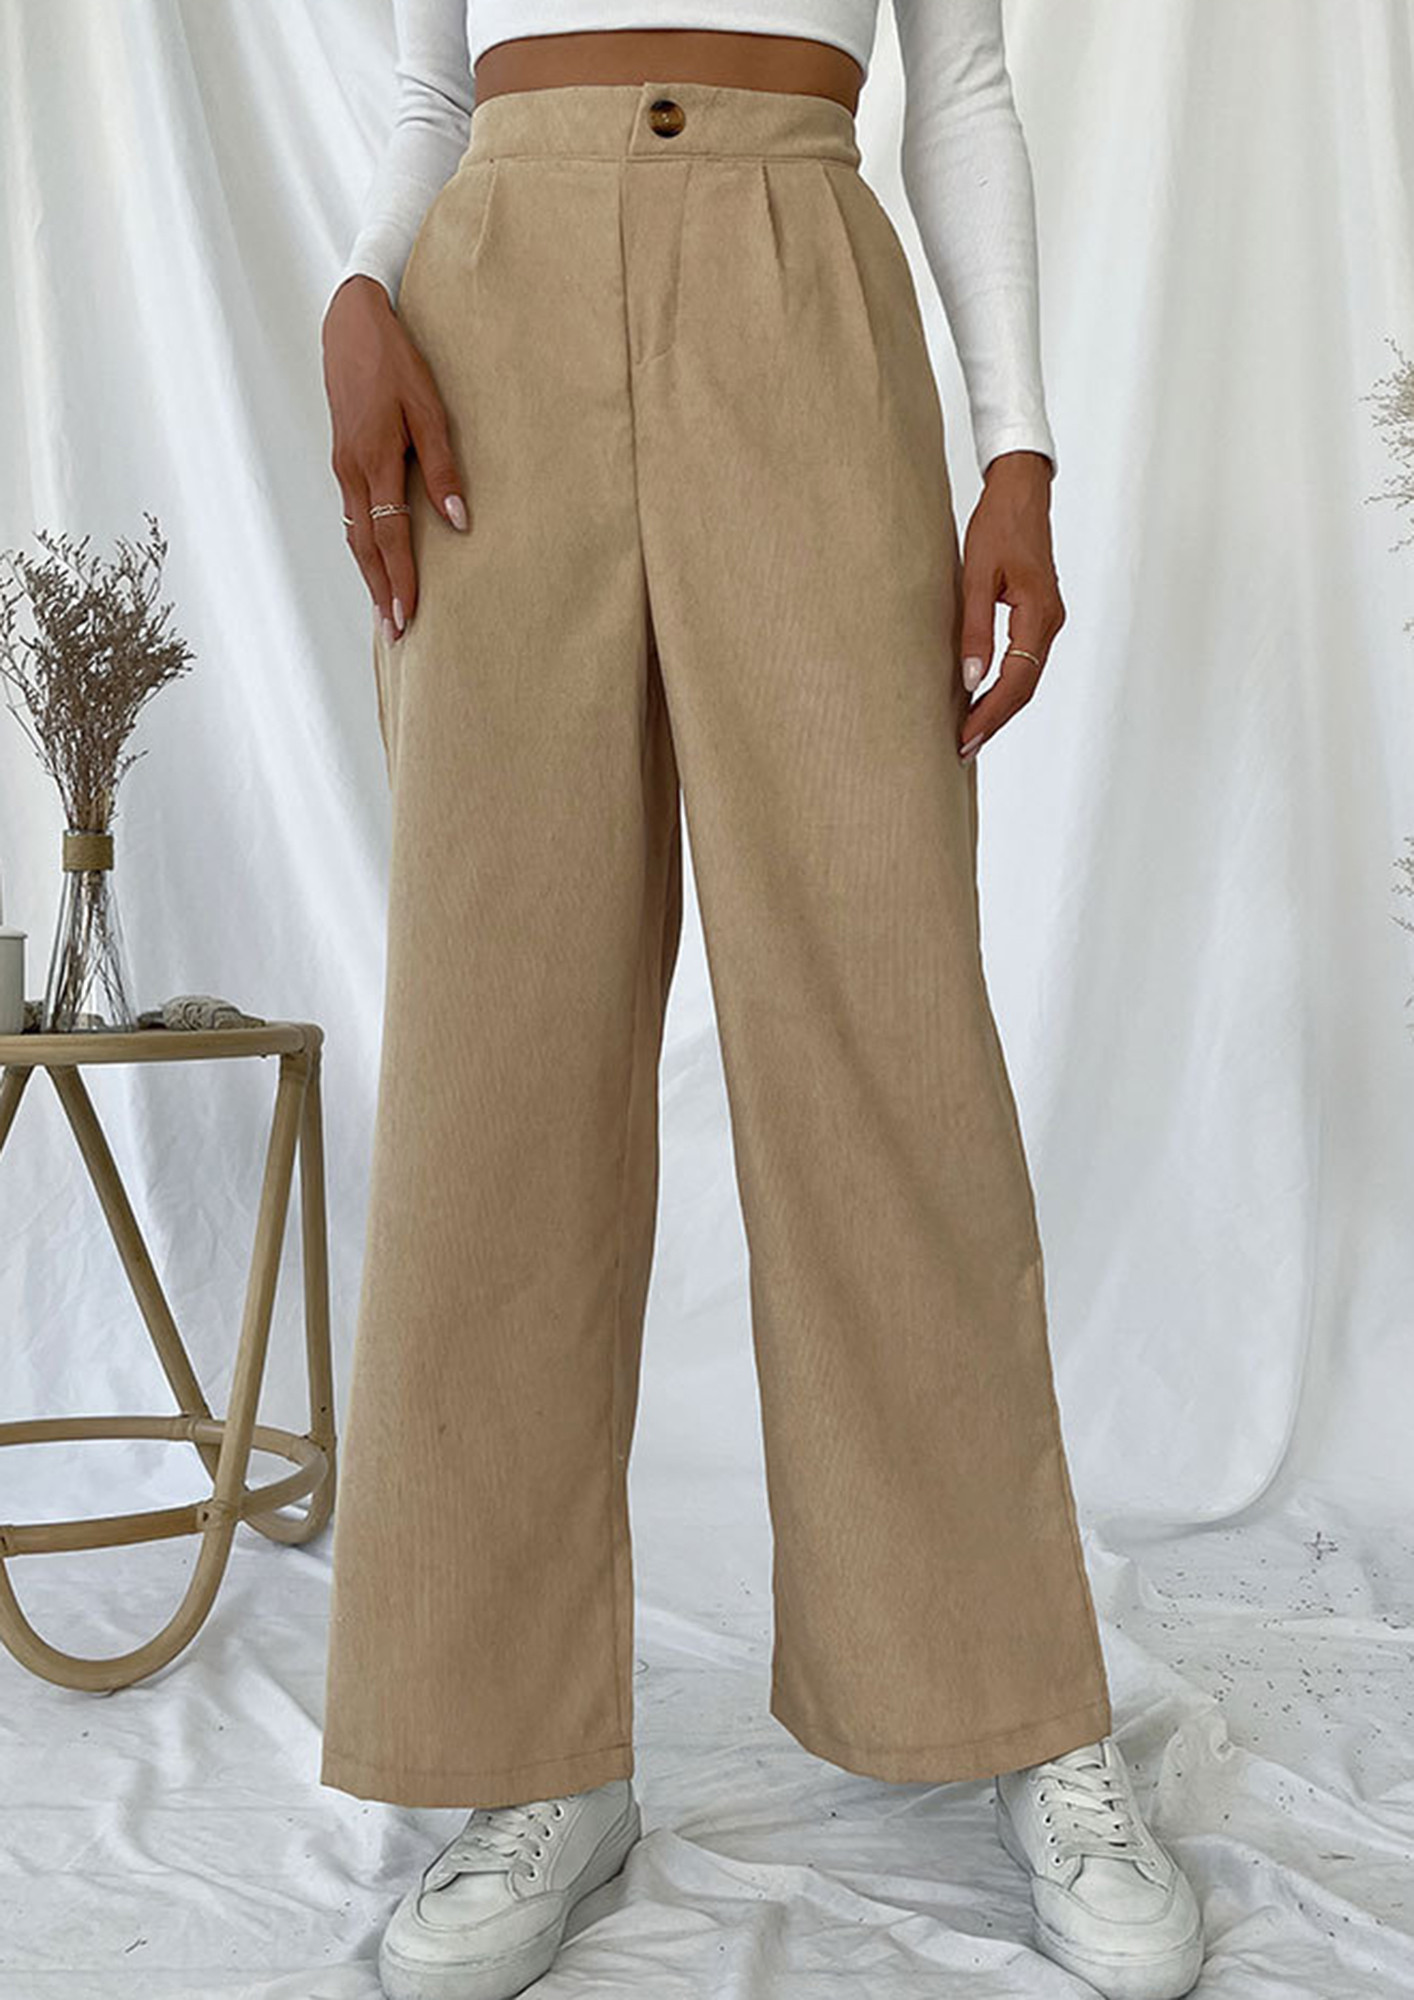 Naariy Stretchable Cotton Pants for Women | Everyday Wear